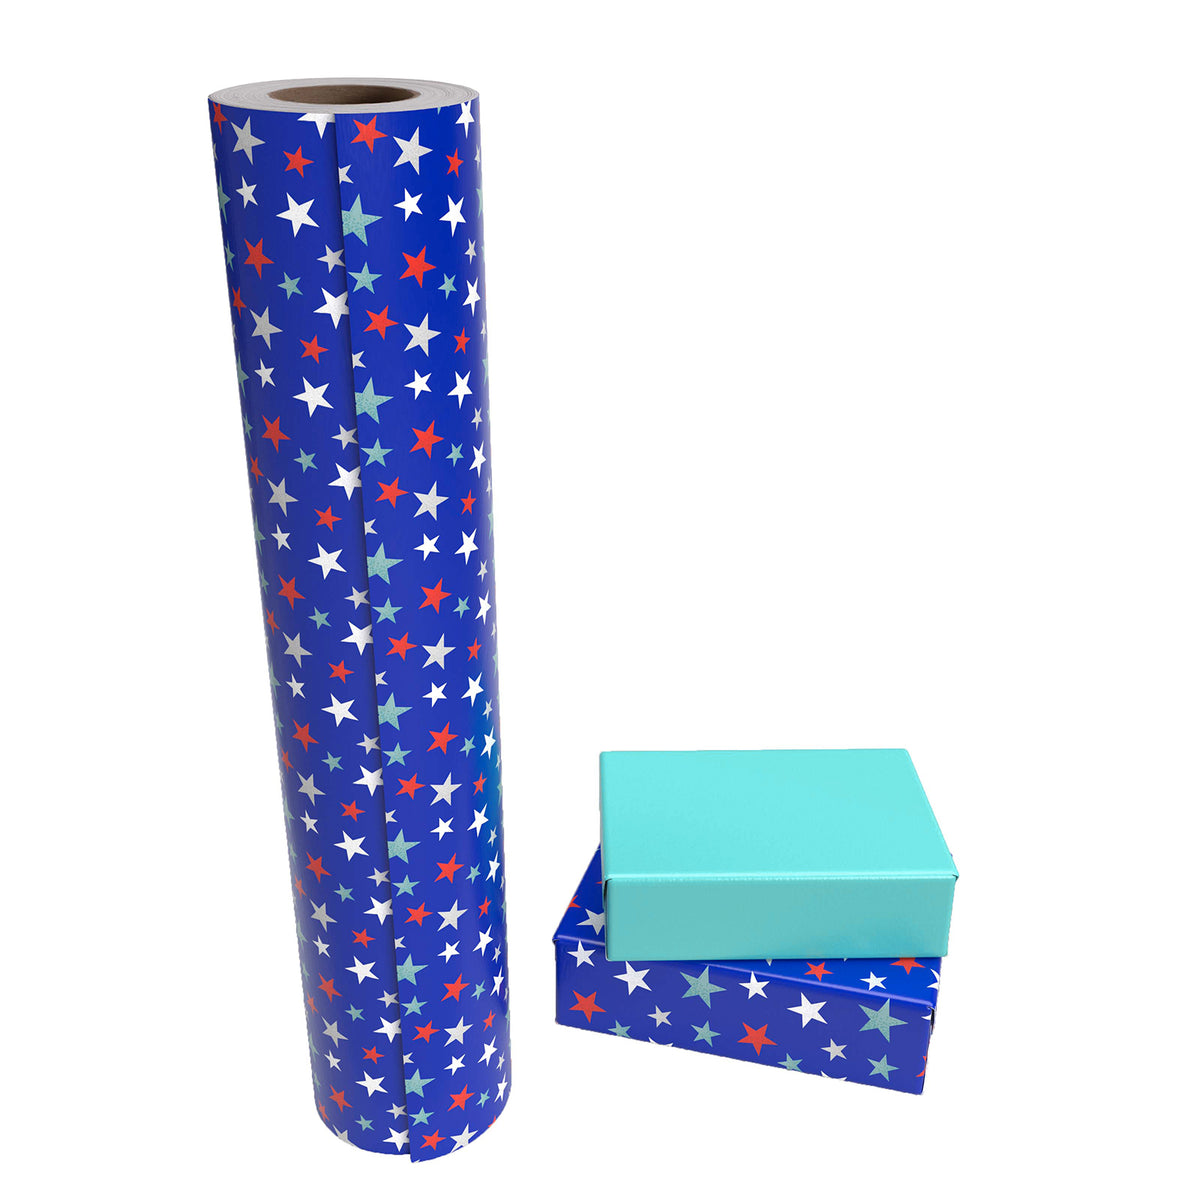 Jumbo Gold Foil 30 sq ft. Gift Wrapping Paper Rolls - Sold